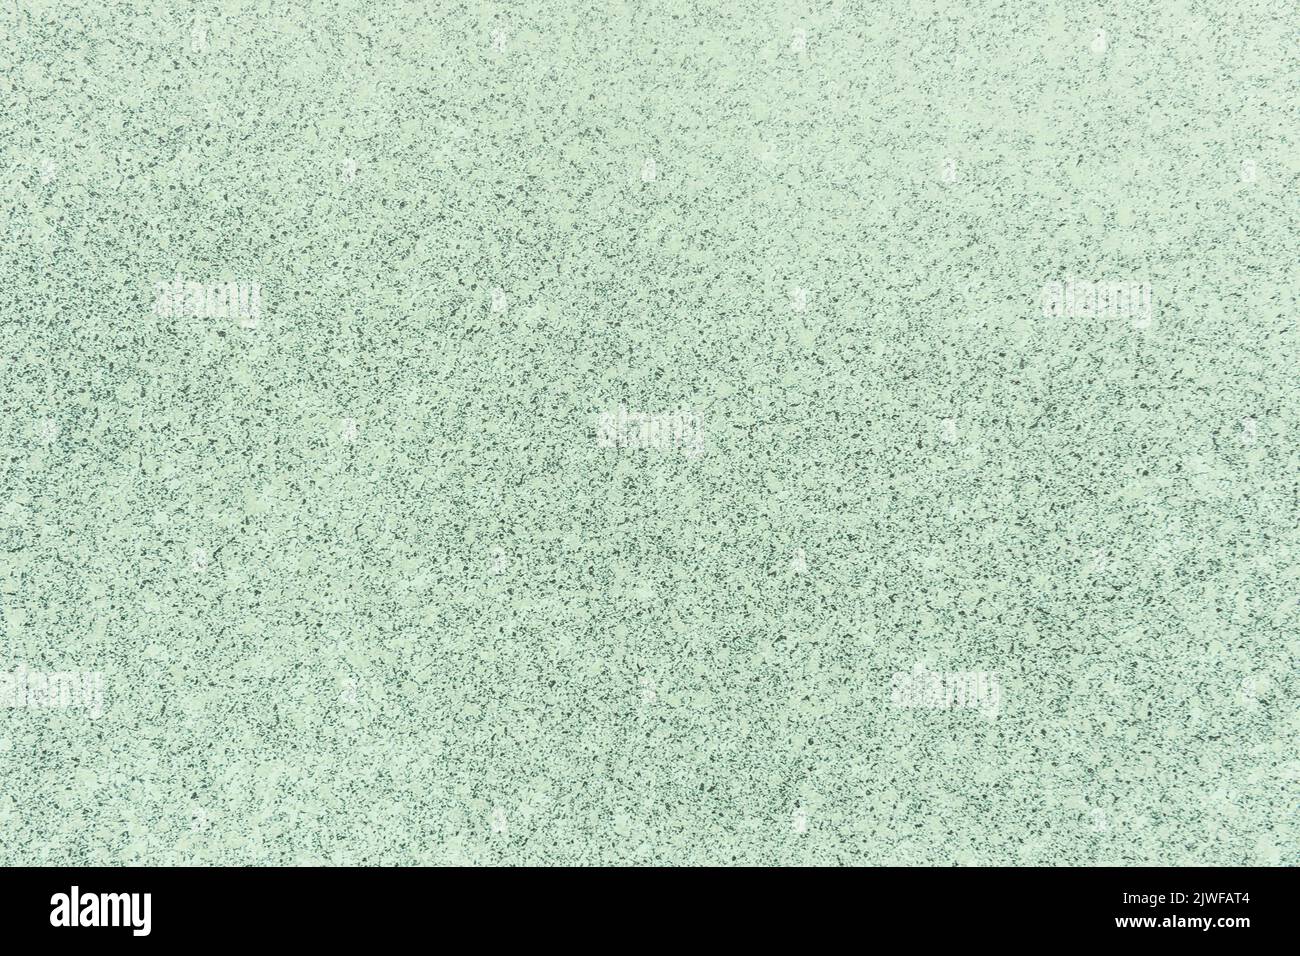 Mint green plaster background. Horizontal creative theme poster, greeting cards, headers, website and app Stock Photo